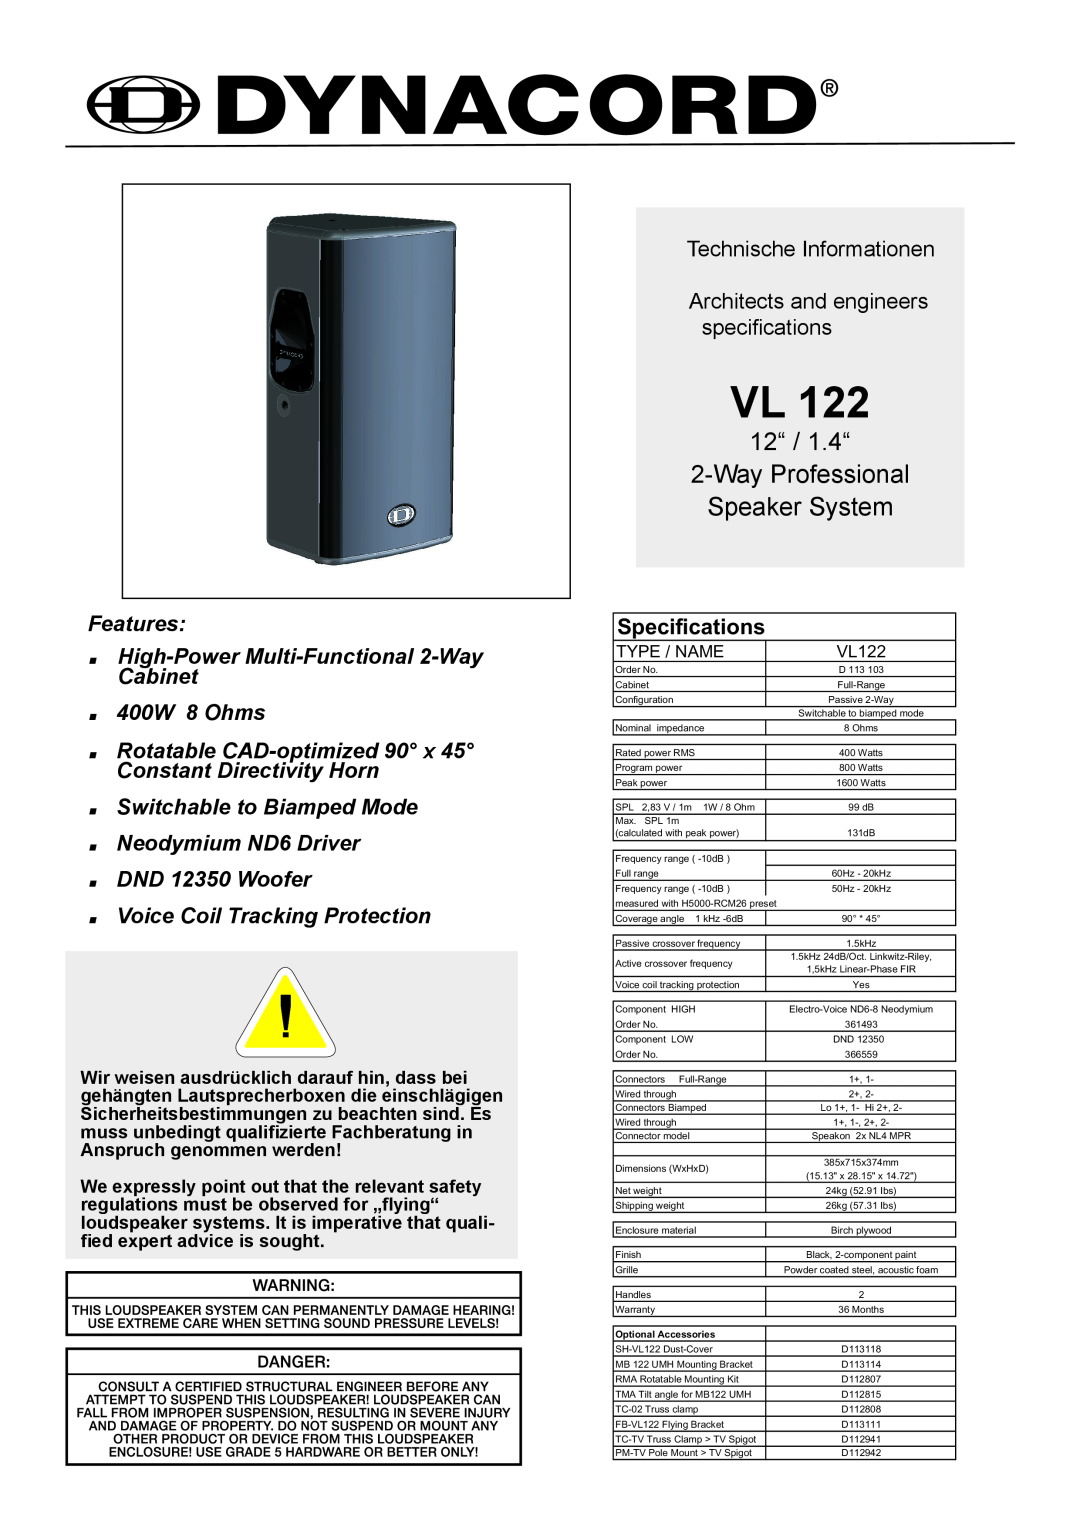 Dynacord VL 122 specifications Specifications, 12“ / 1.4“ 2-WayProfessional Speaker System, 400W 8 Ohms 